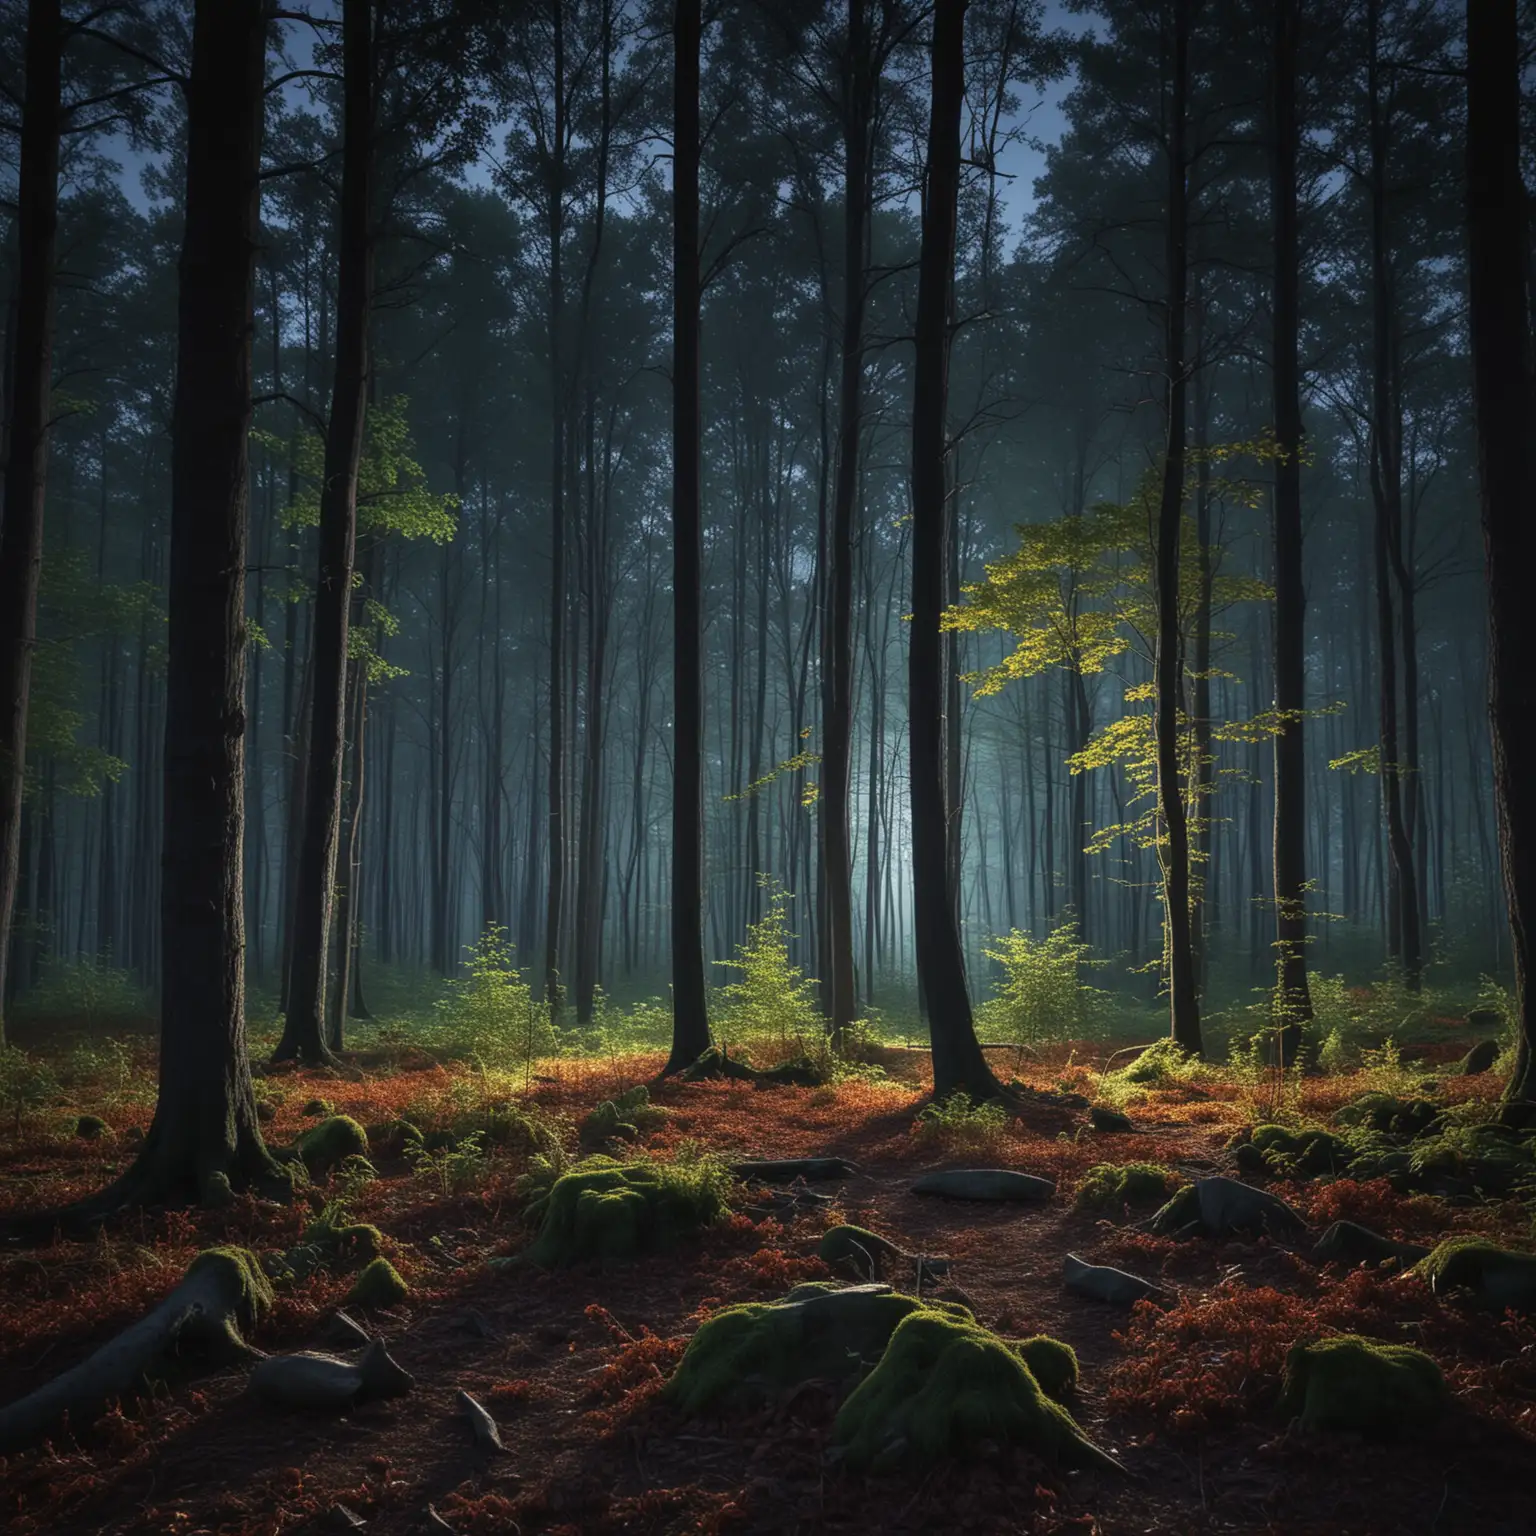 Creat an image of a heavily wooded forest in the night full of rich color gently illuminated by moonlight from eye level perspective 